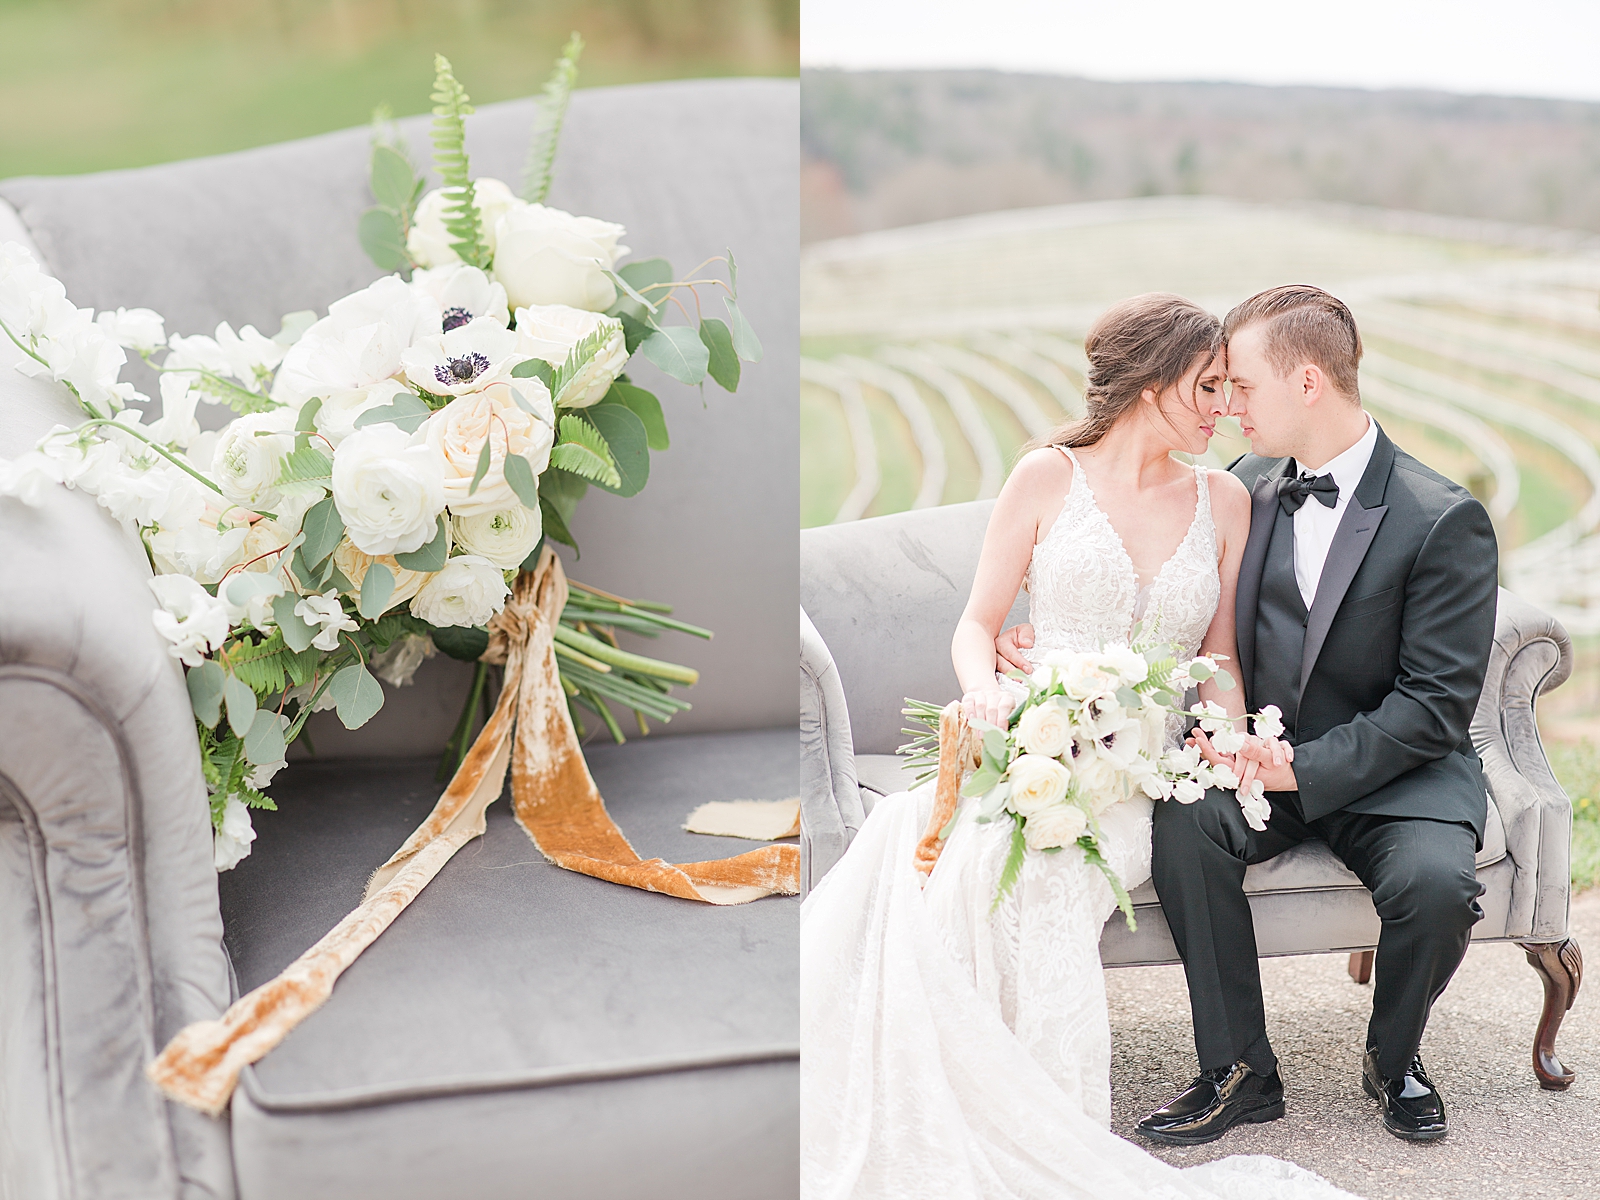 Montaluce Winery Wedding Bouquet on Grey Velvet Couch and Bride and Groom Sitting on Grey Velvet Couch Photos